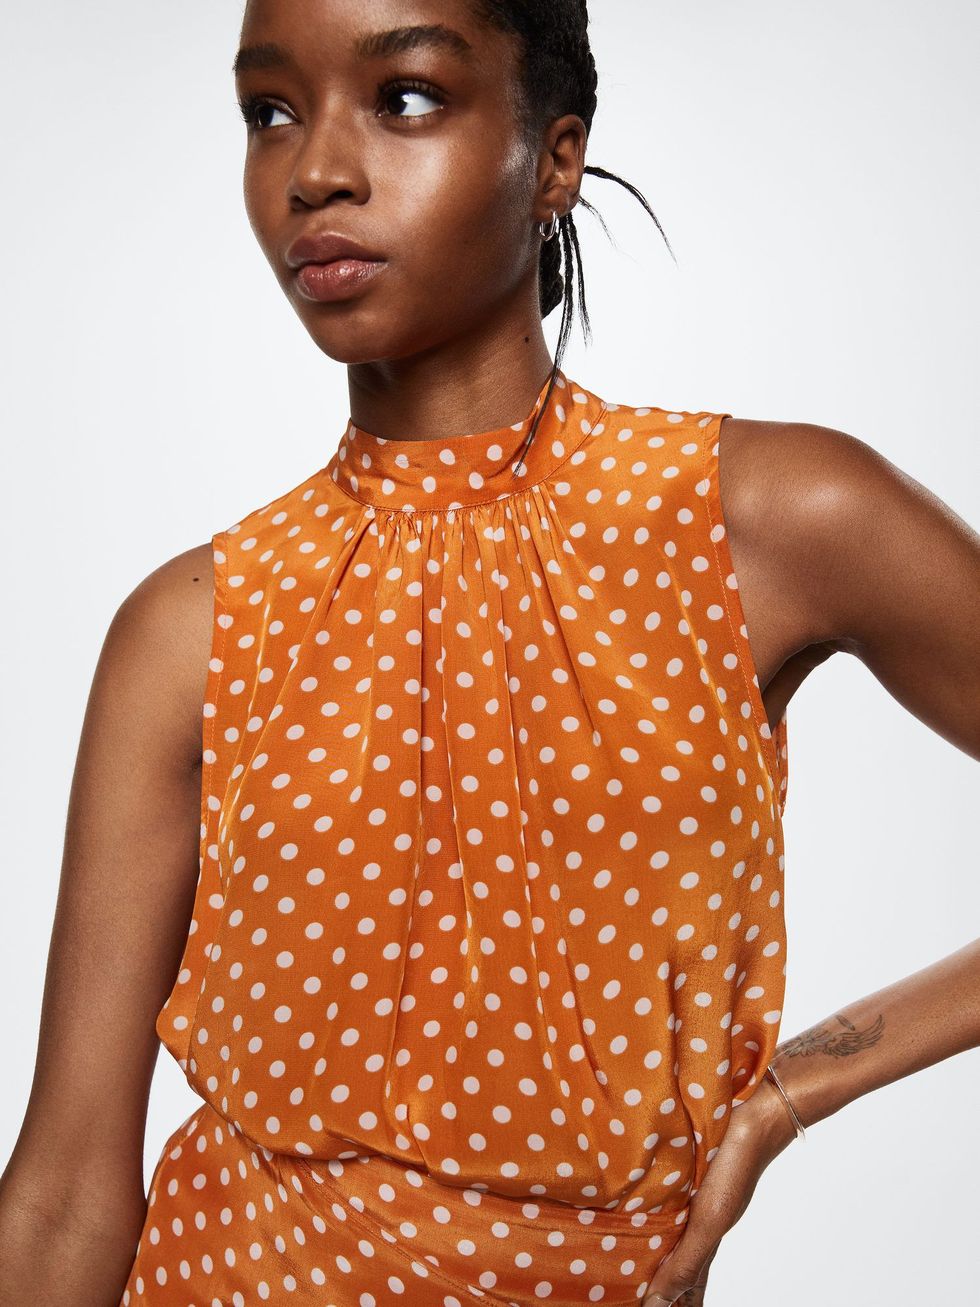 Polka Dot Top  Famous Outfits - Women